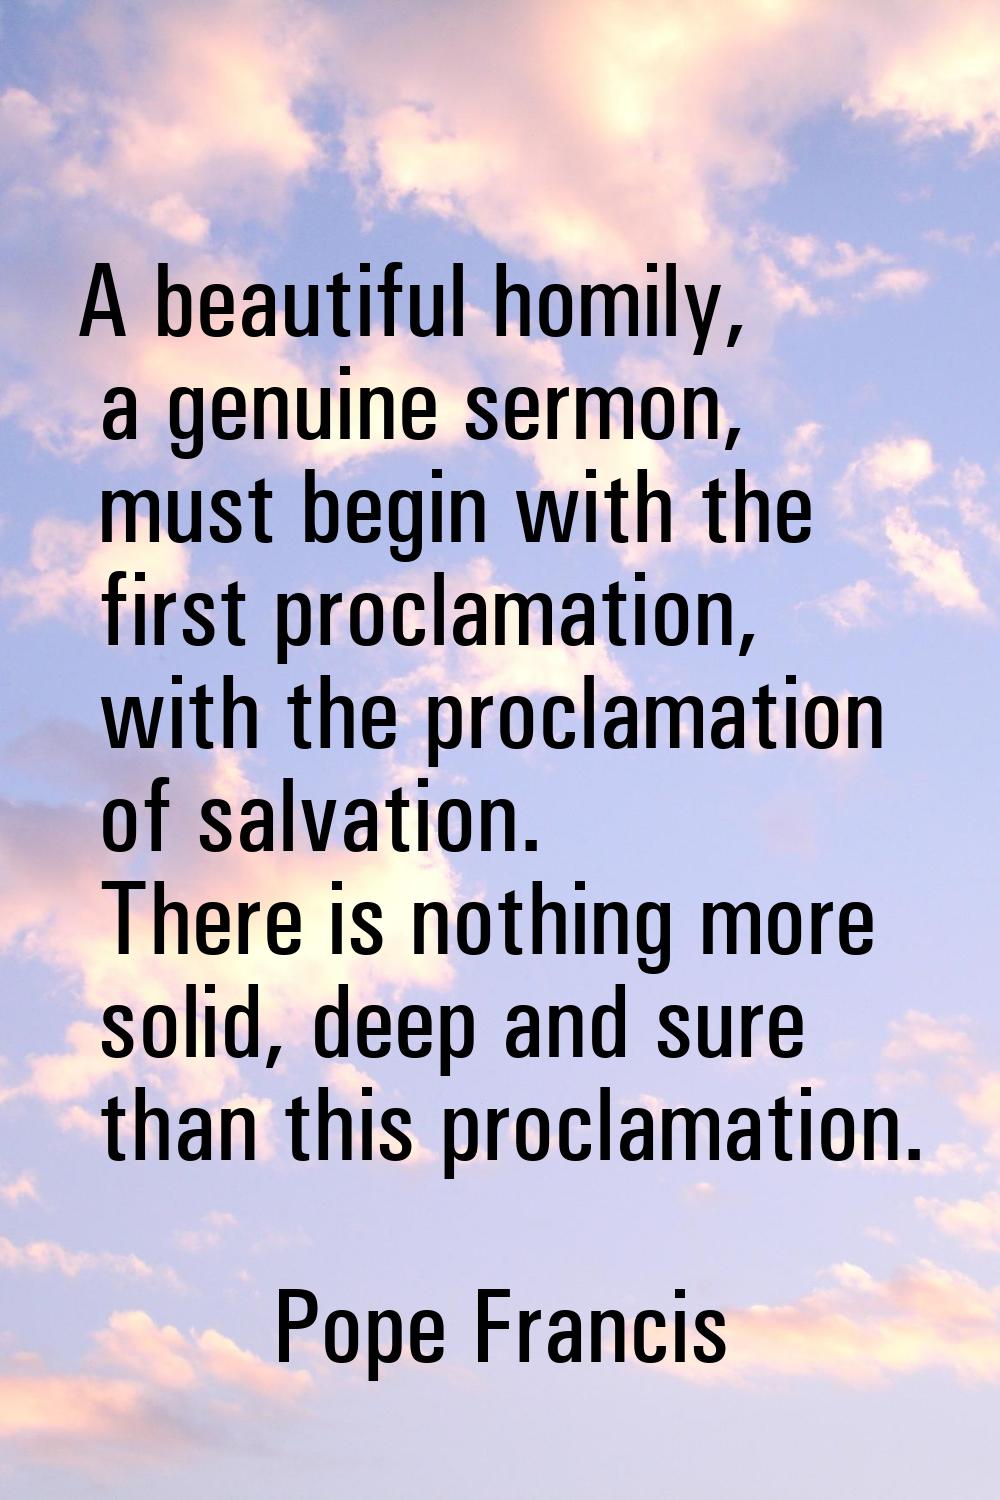 A beautiful homily, a genuine sermon, must begin with the first proclamation, with the proclamation